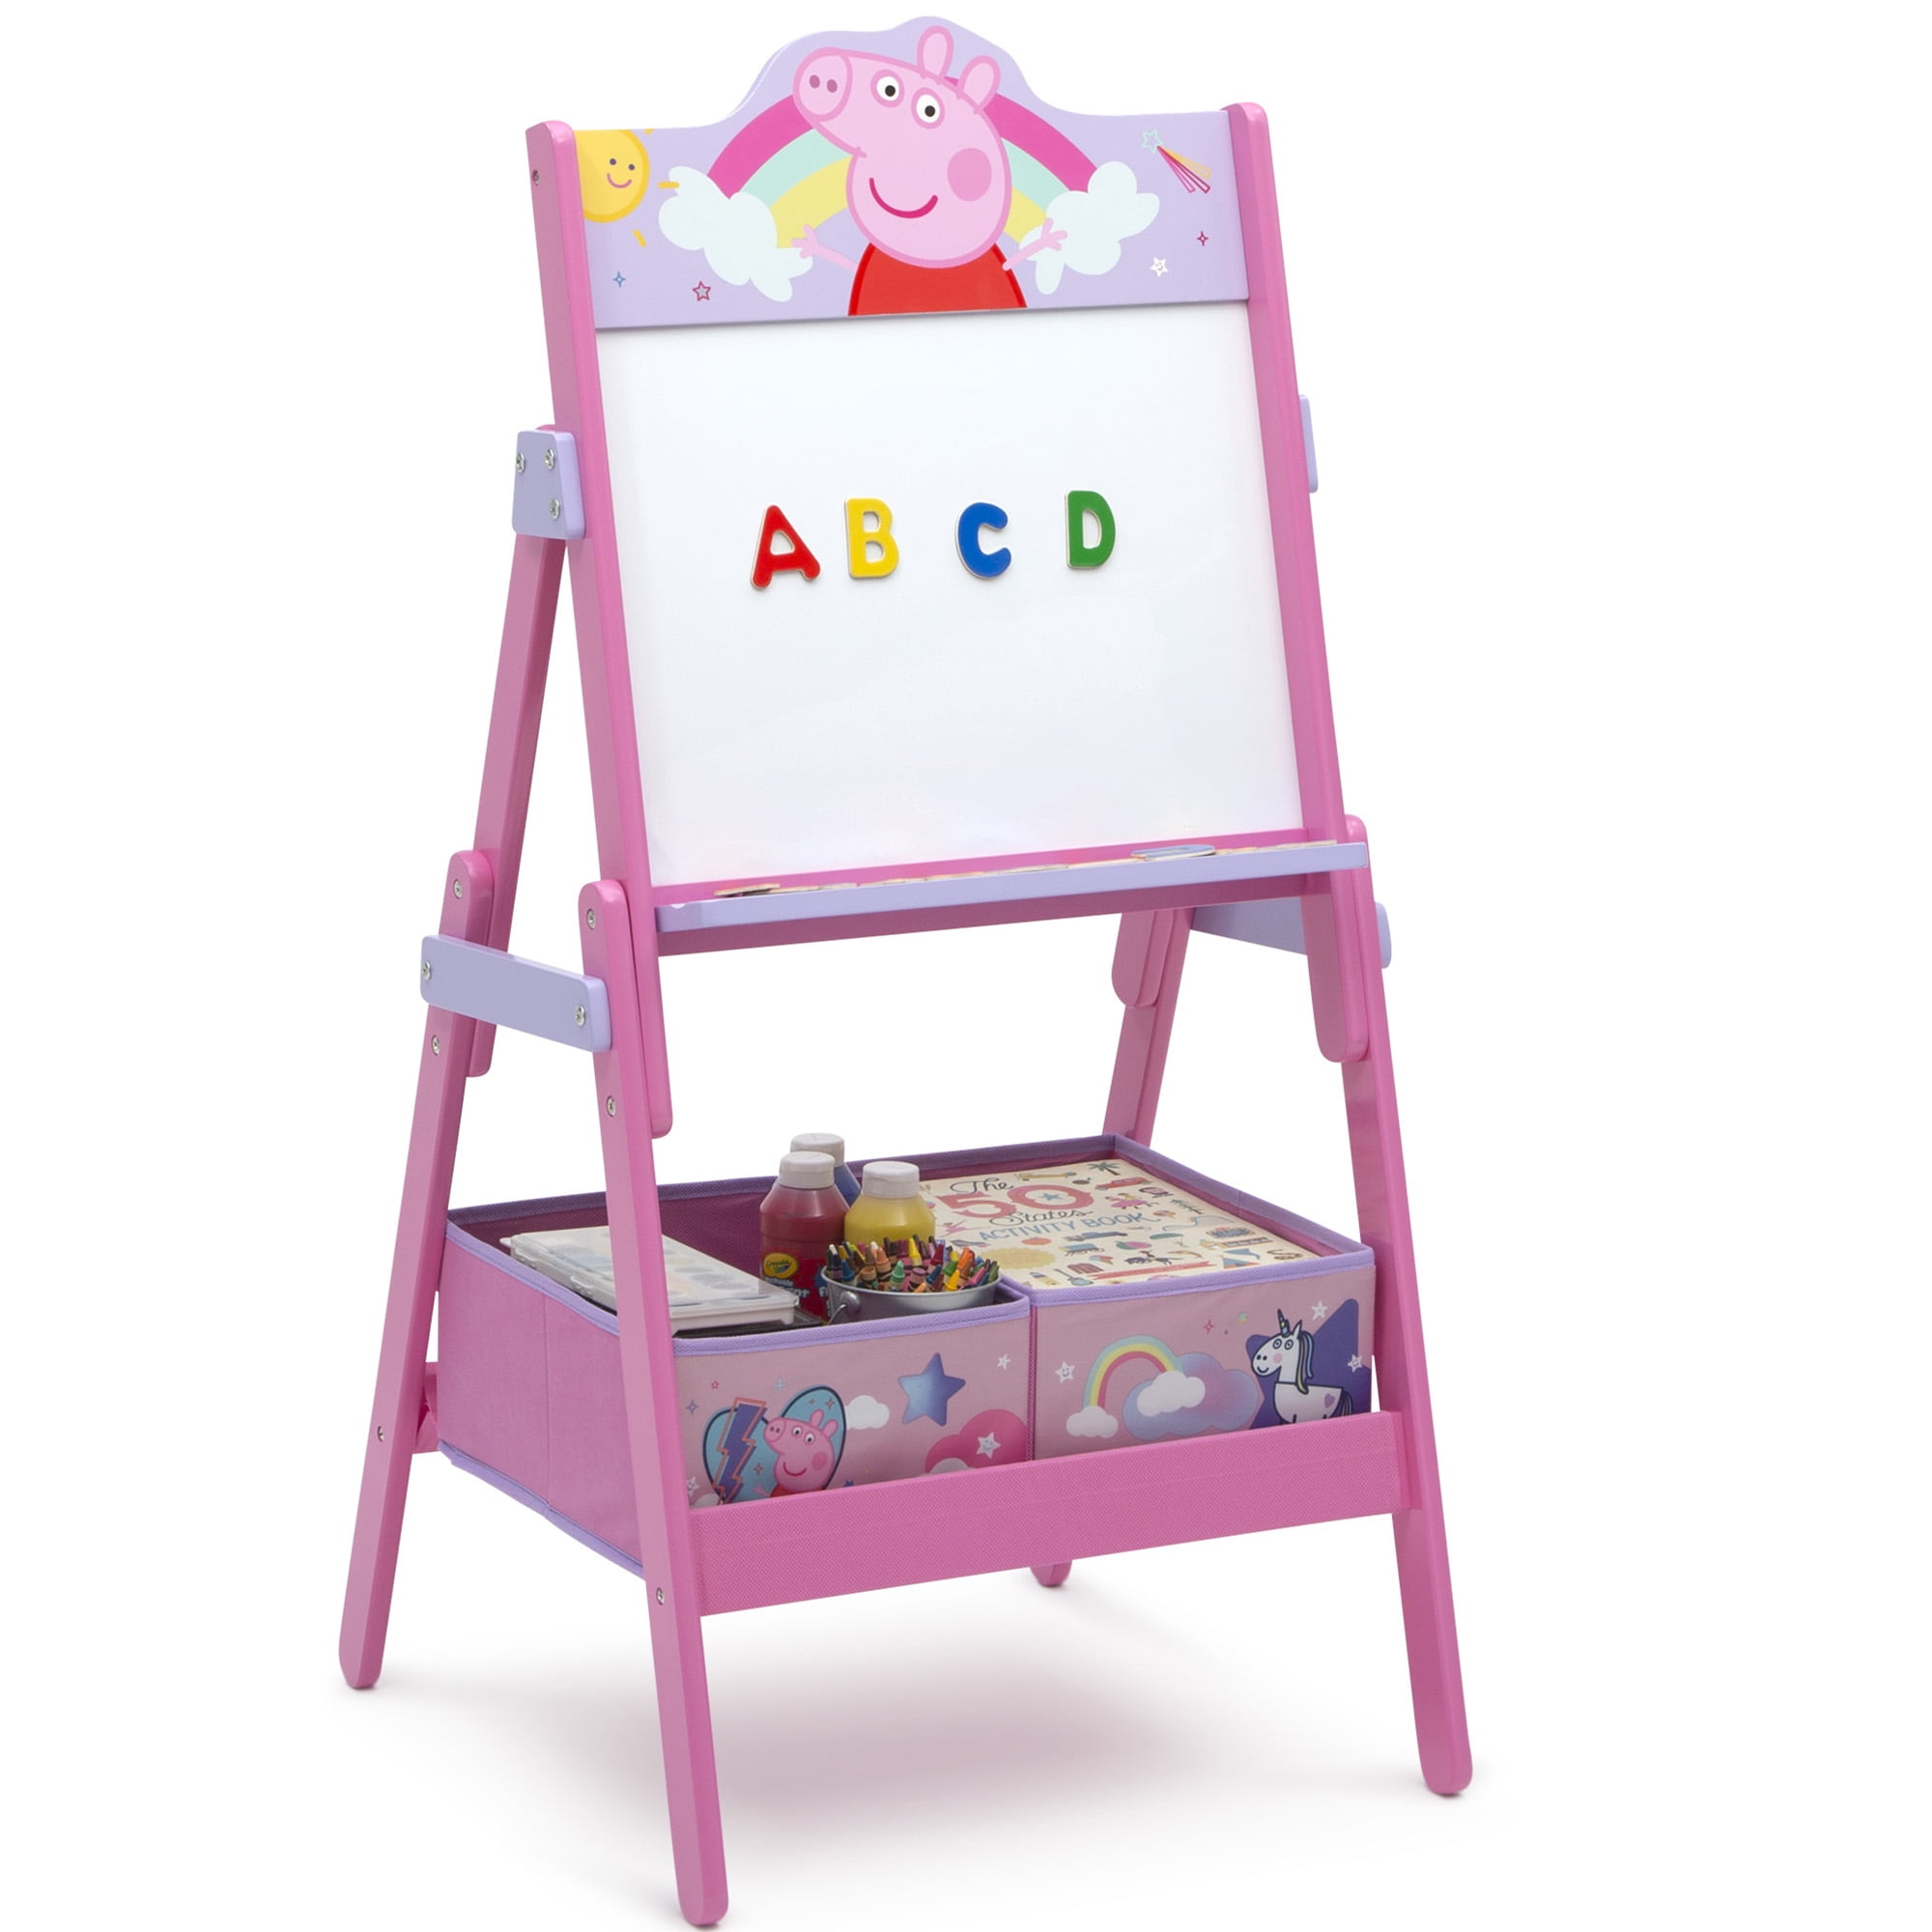 Peppa Pig Wooden Activity Easel with 